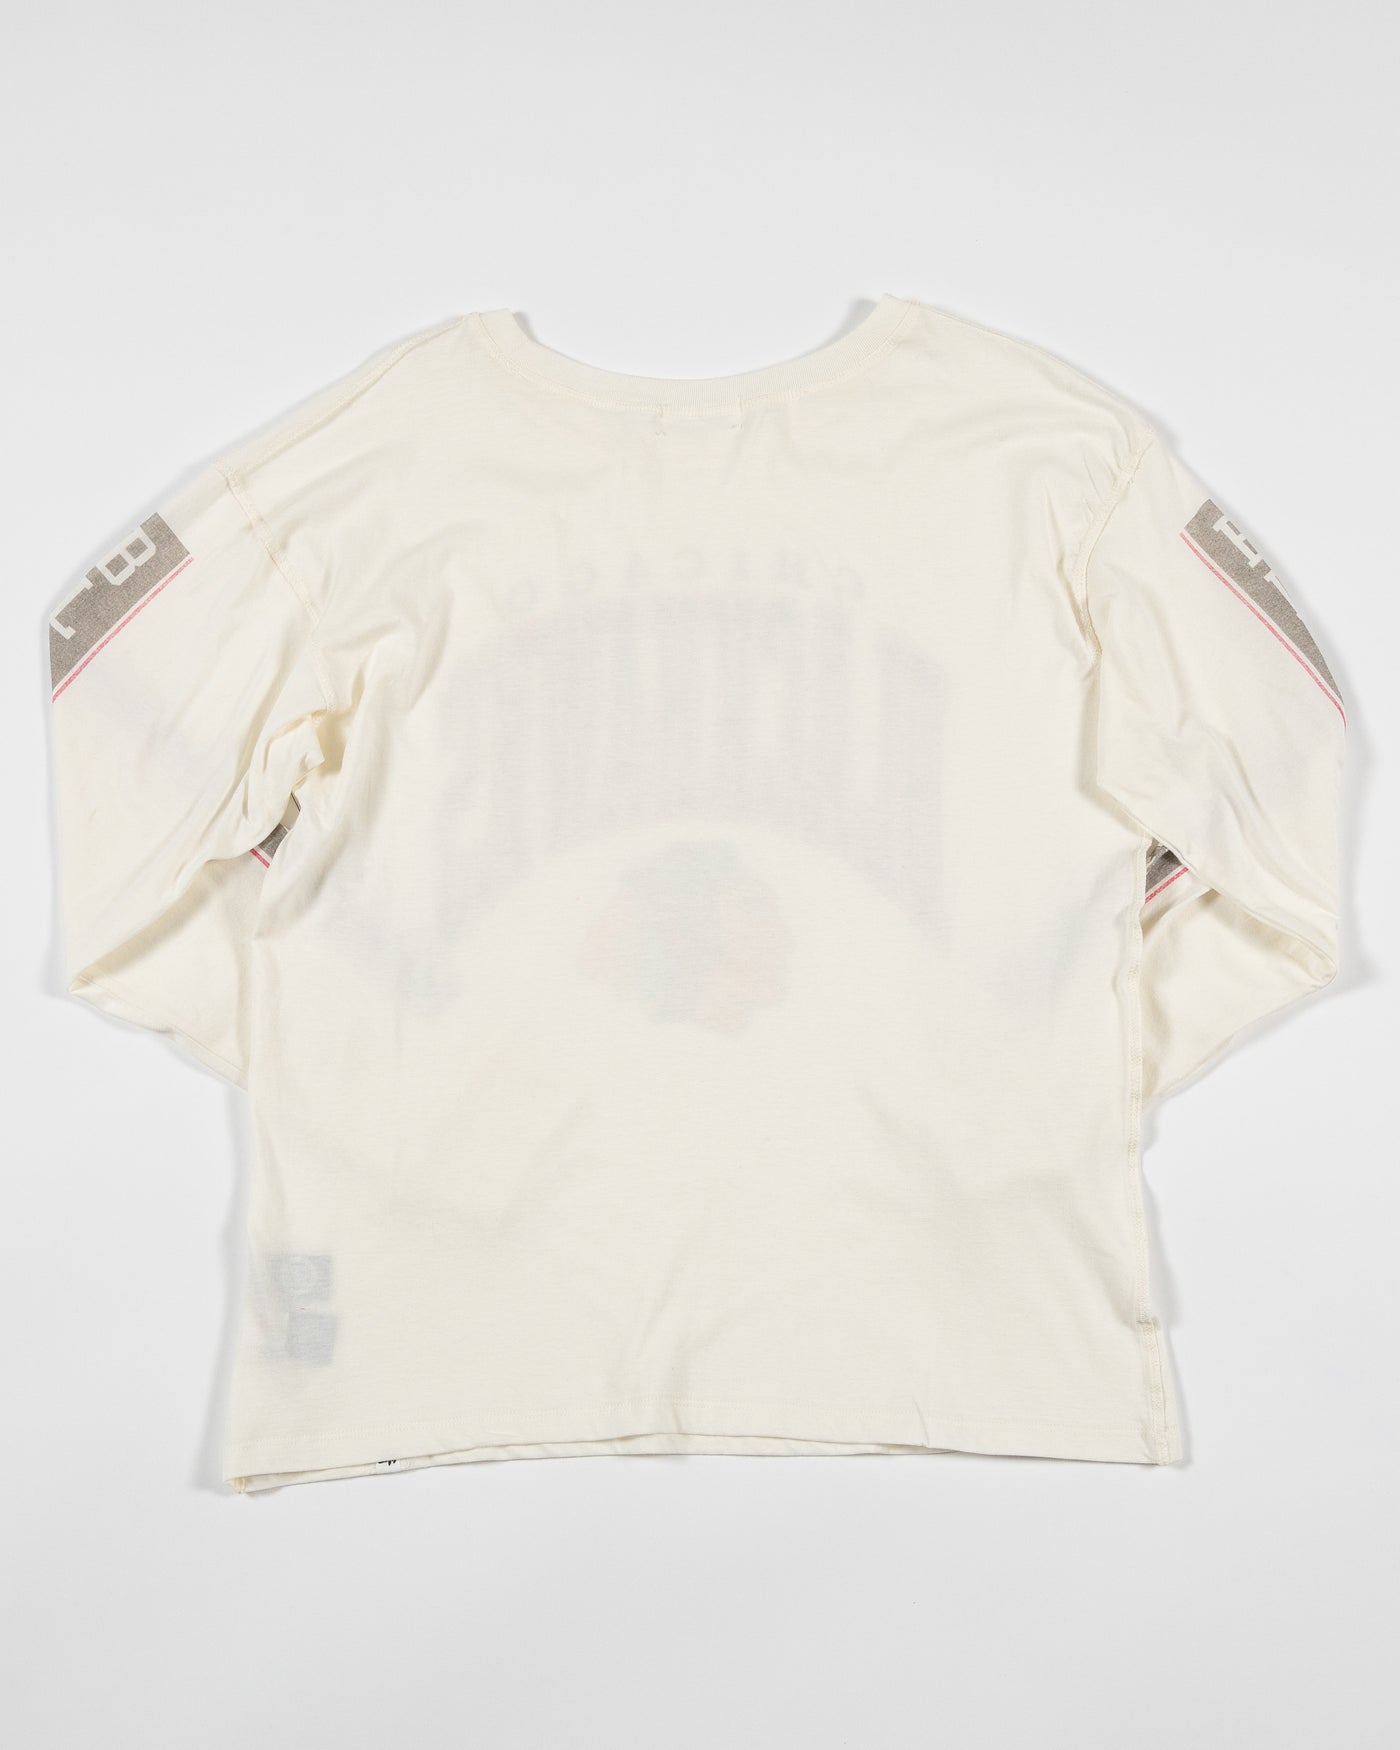 '47 brand white long sleeve tee with Chicago Blackhawks branding on sleeves and center chest - back lay flat